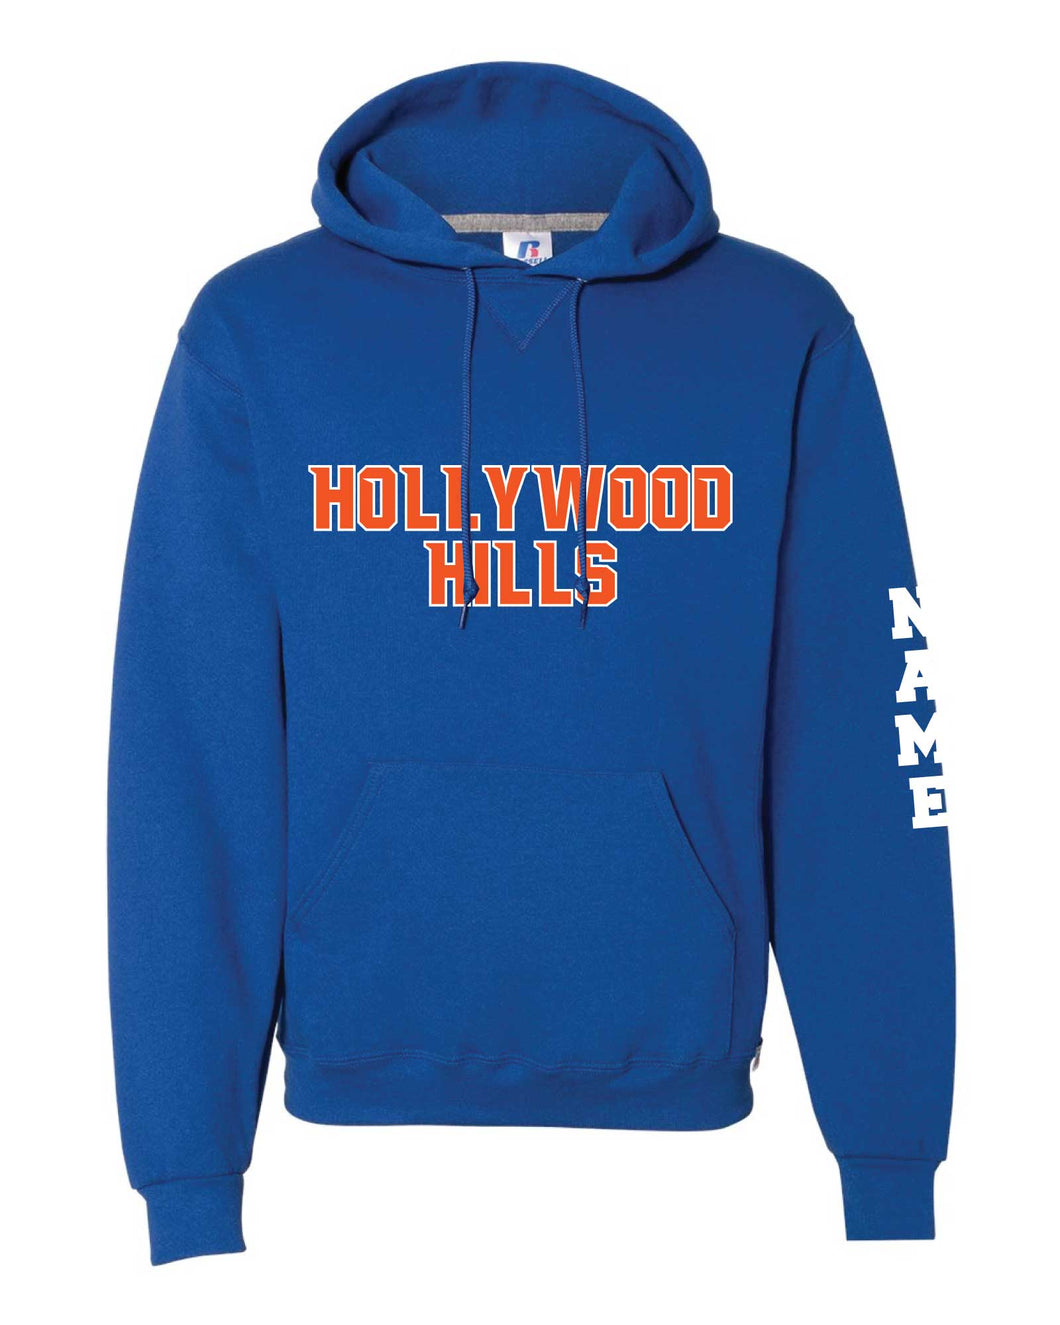 Hollywood Hills Wrestling Russell Athletic Cotton Hoodie - Royal Blue